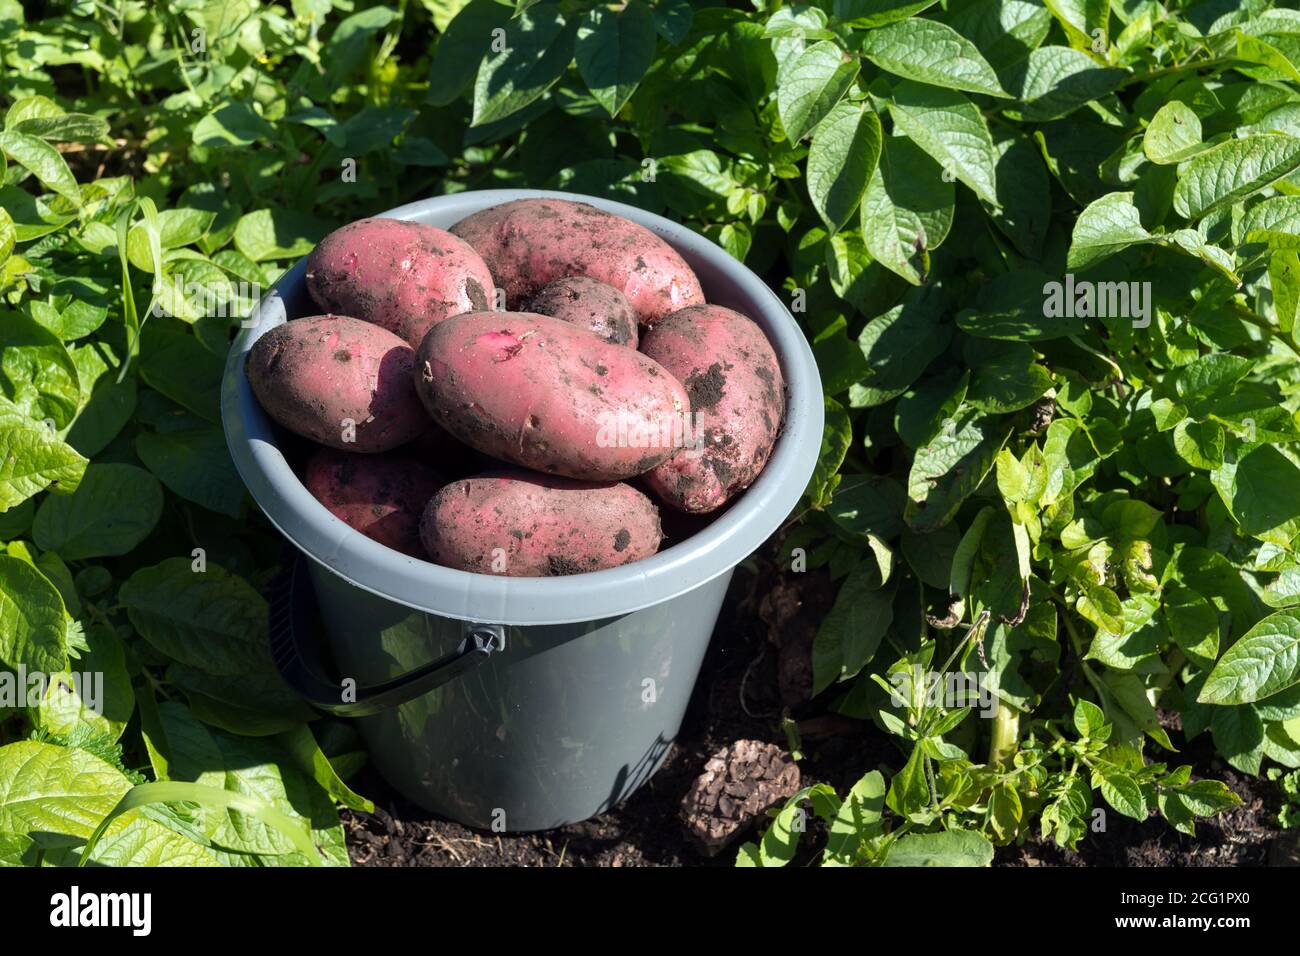 A gray plastic bucket stands filled with red potatoes among green potato tops, at harvest time. Stock Photo